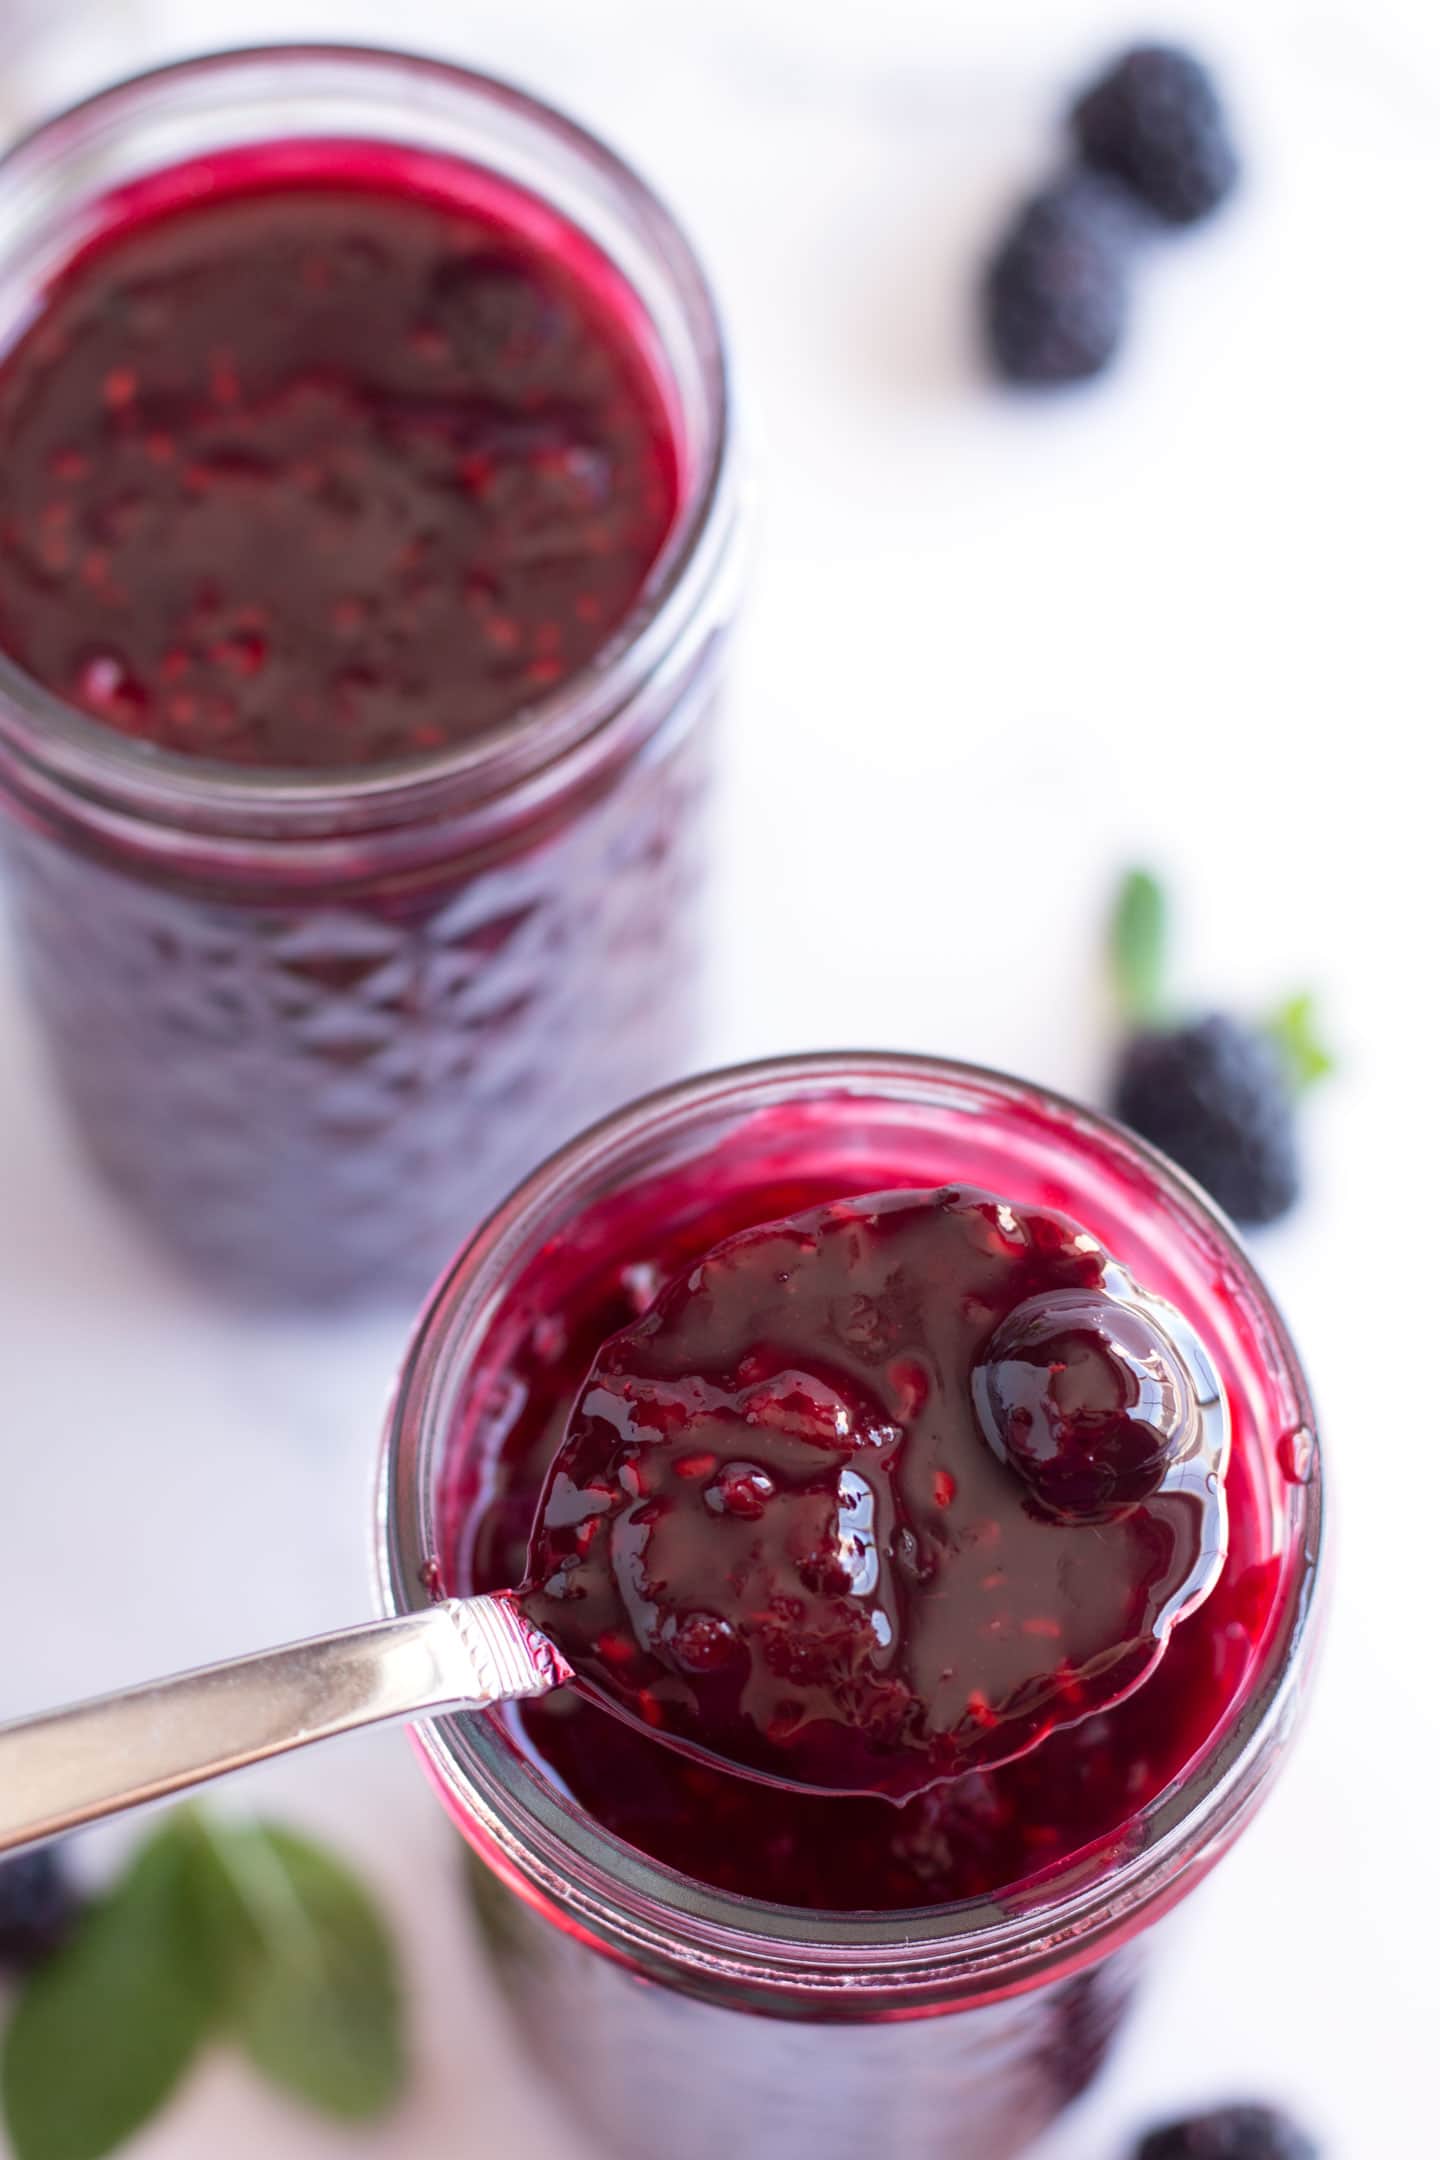 Spoonful of triple berry sauce.